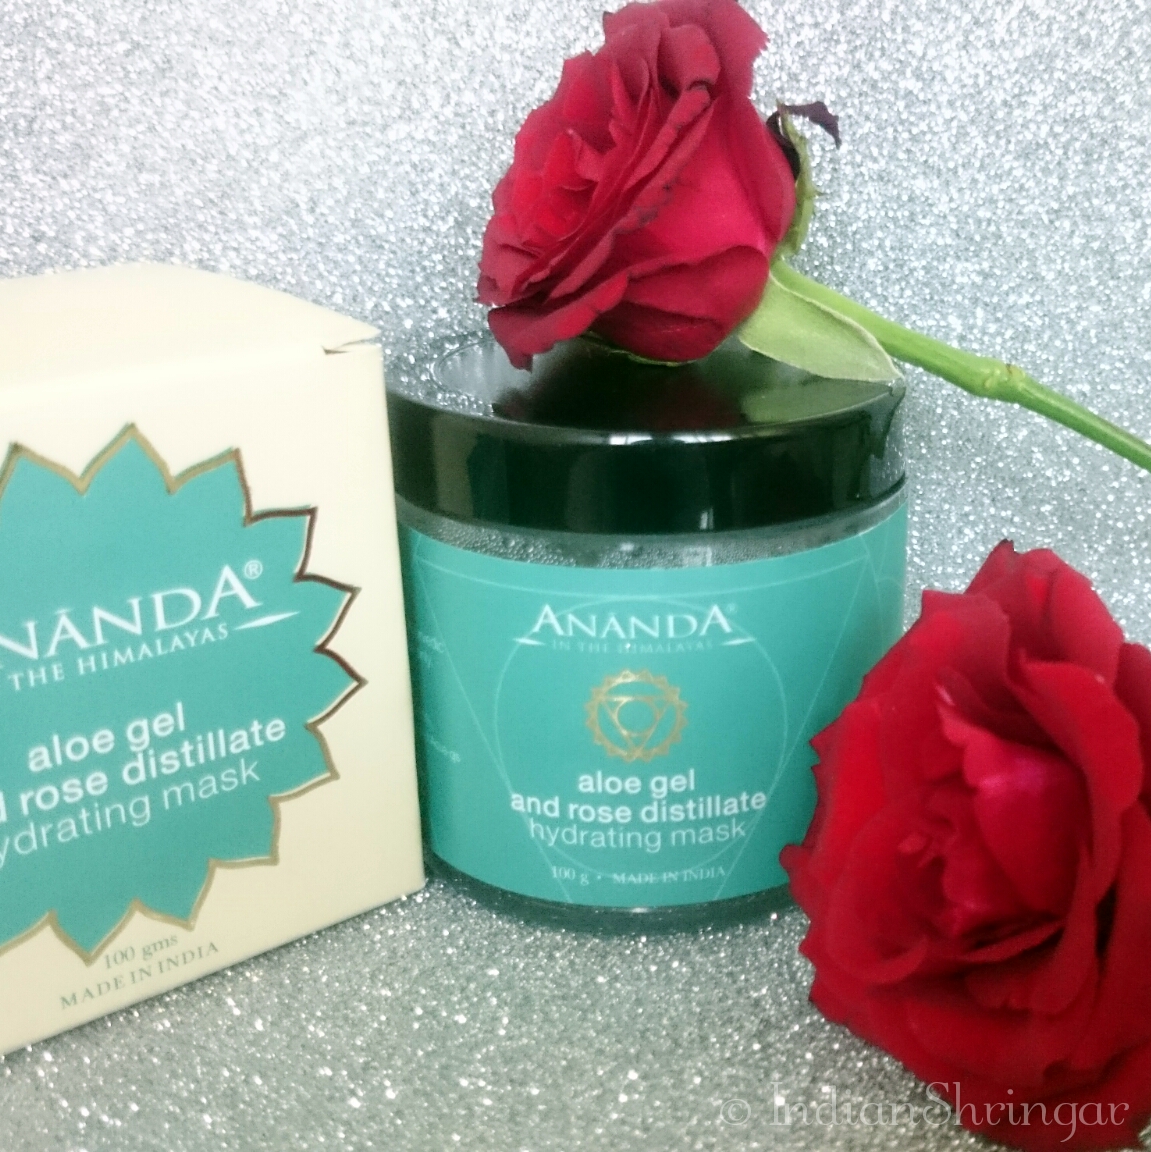 Ananda Spa Aloe Gel and Rose Distillate Hydrating Mask review